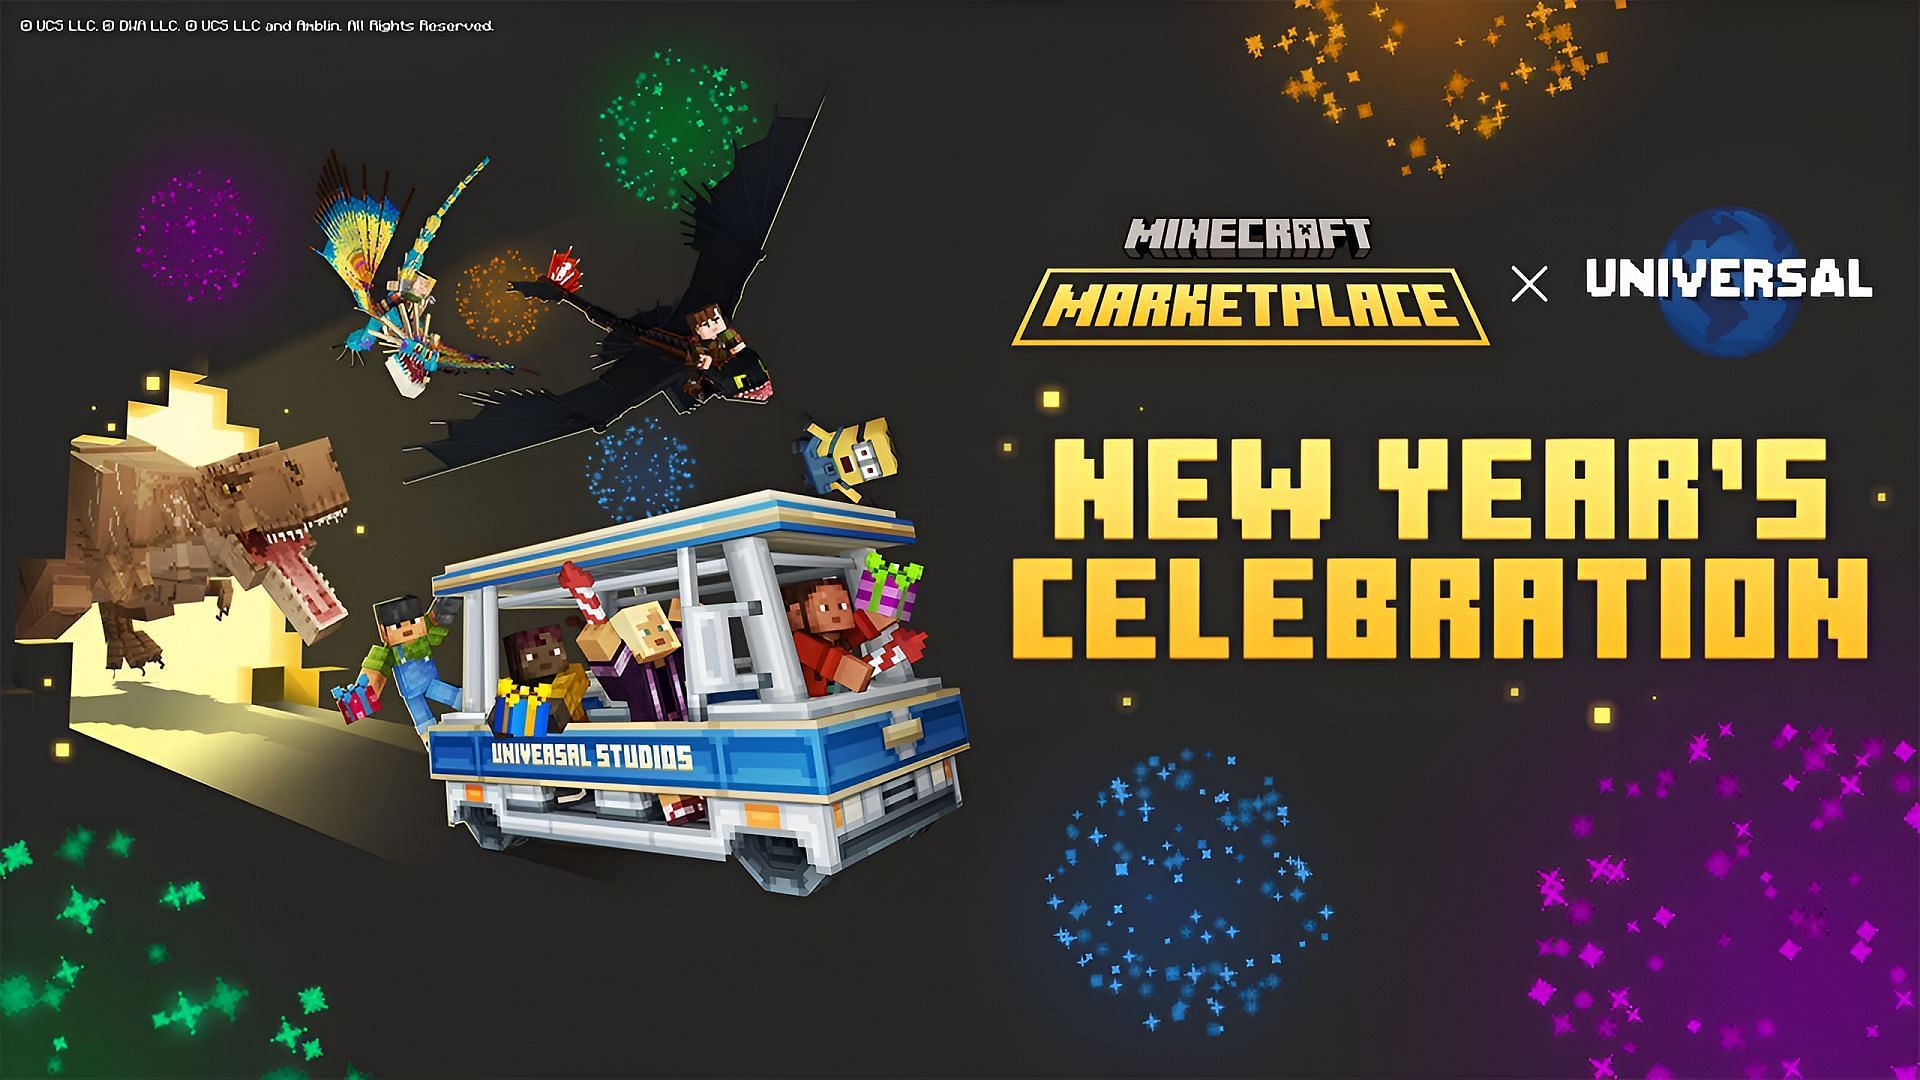 Minecraft&#039;s new free cosmetics are themed after films from Universal Studios (Image via Mojang/Universal)